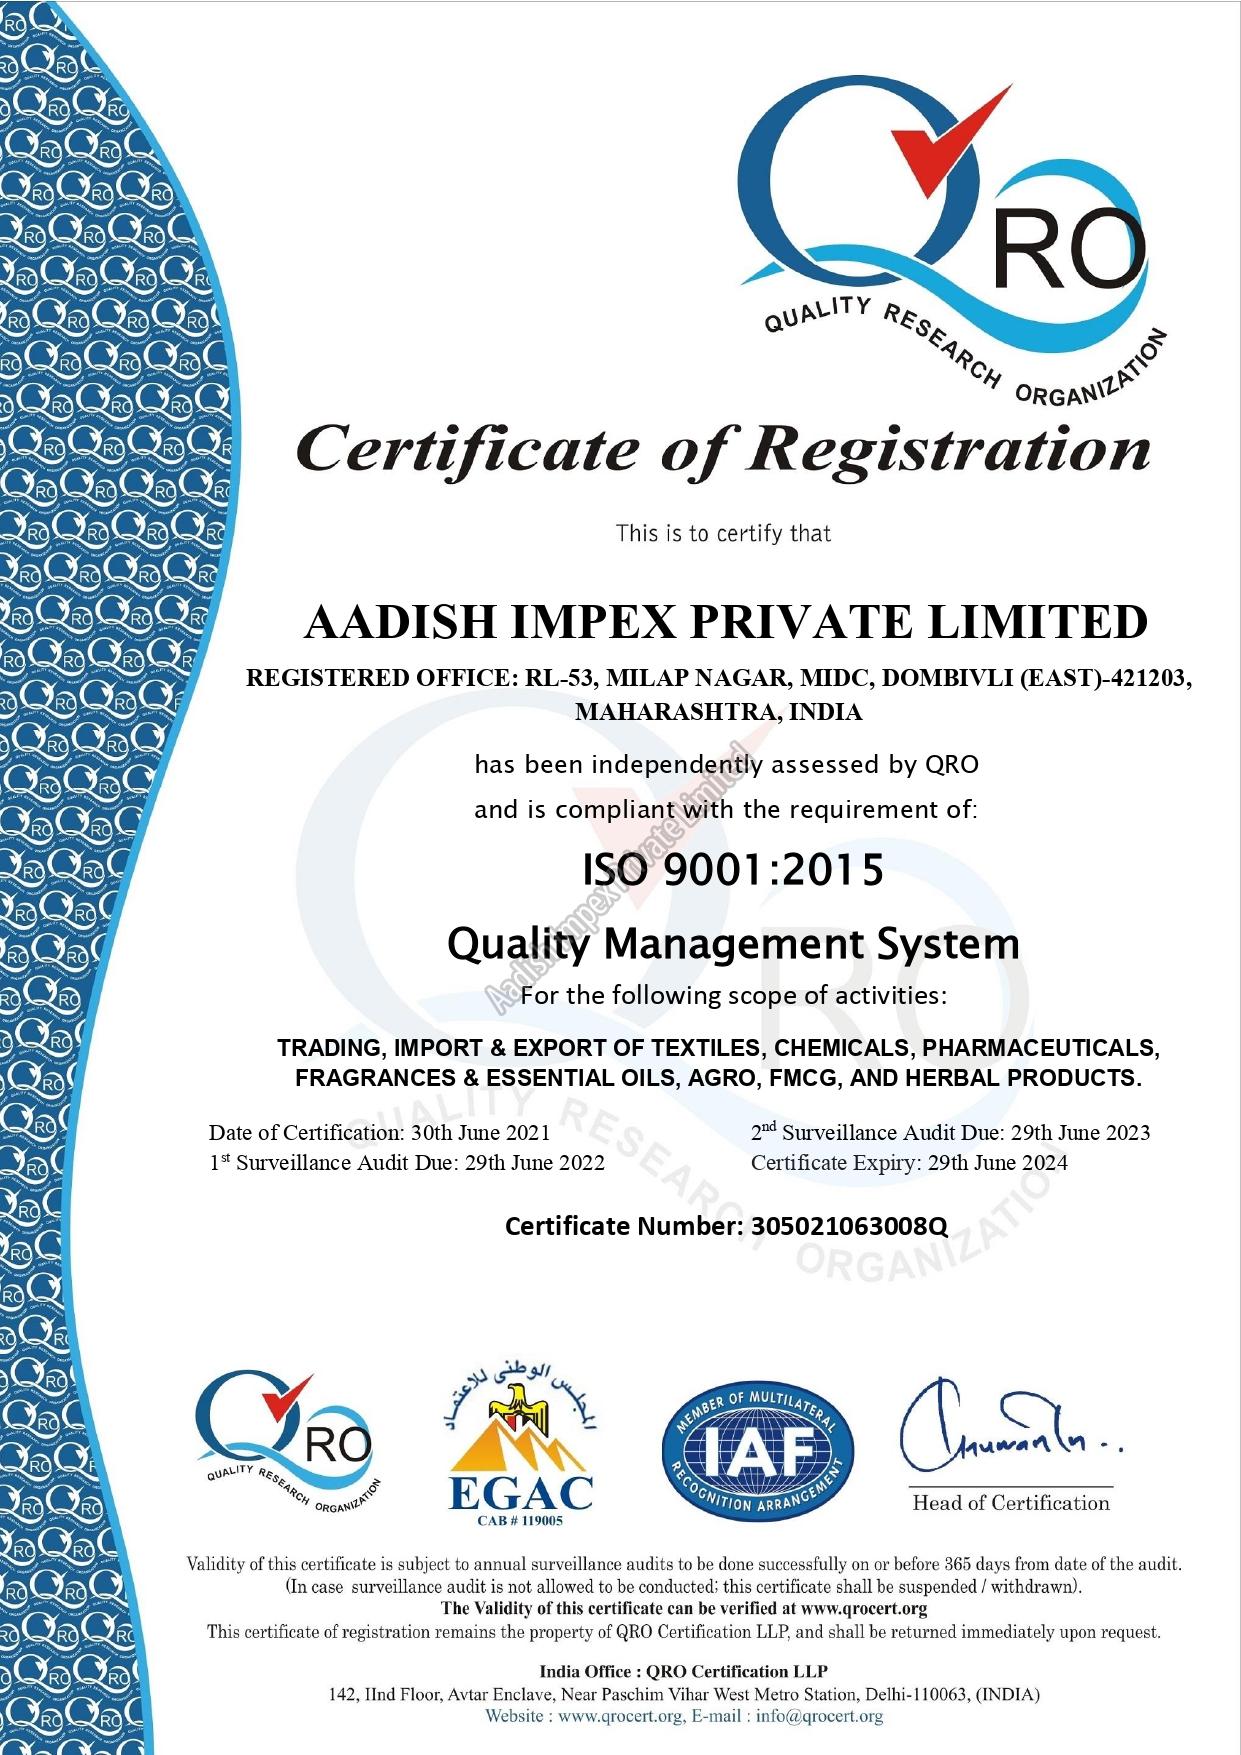 ISO Certificate 9001-2015